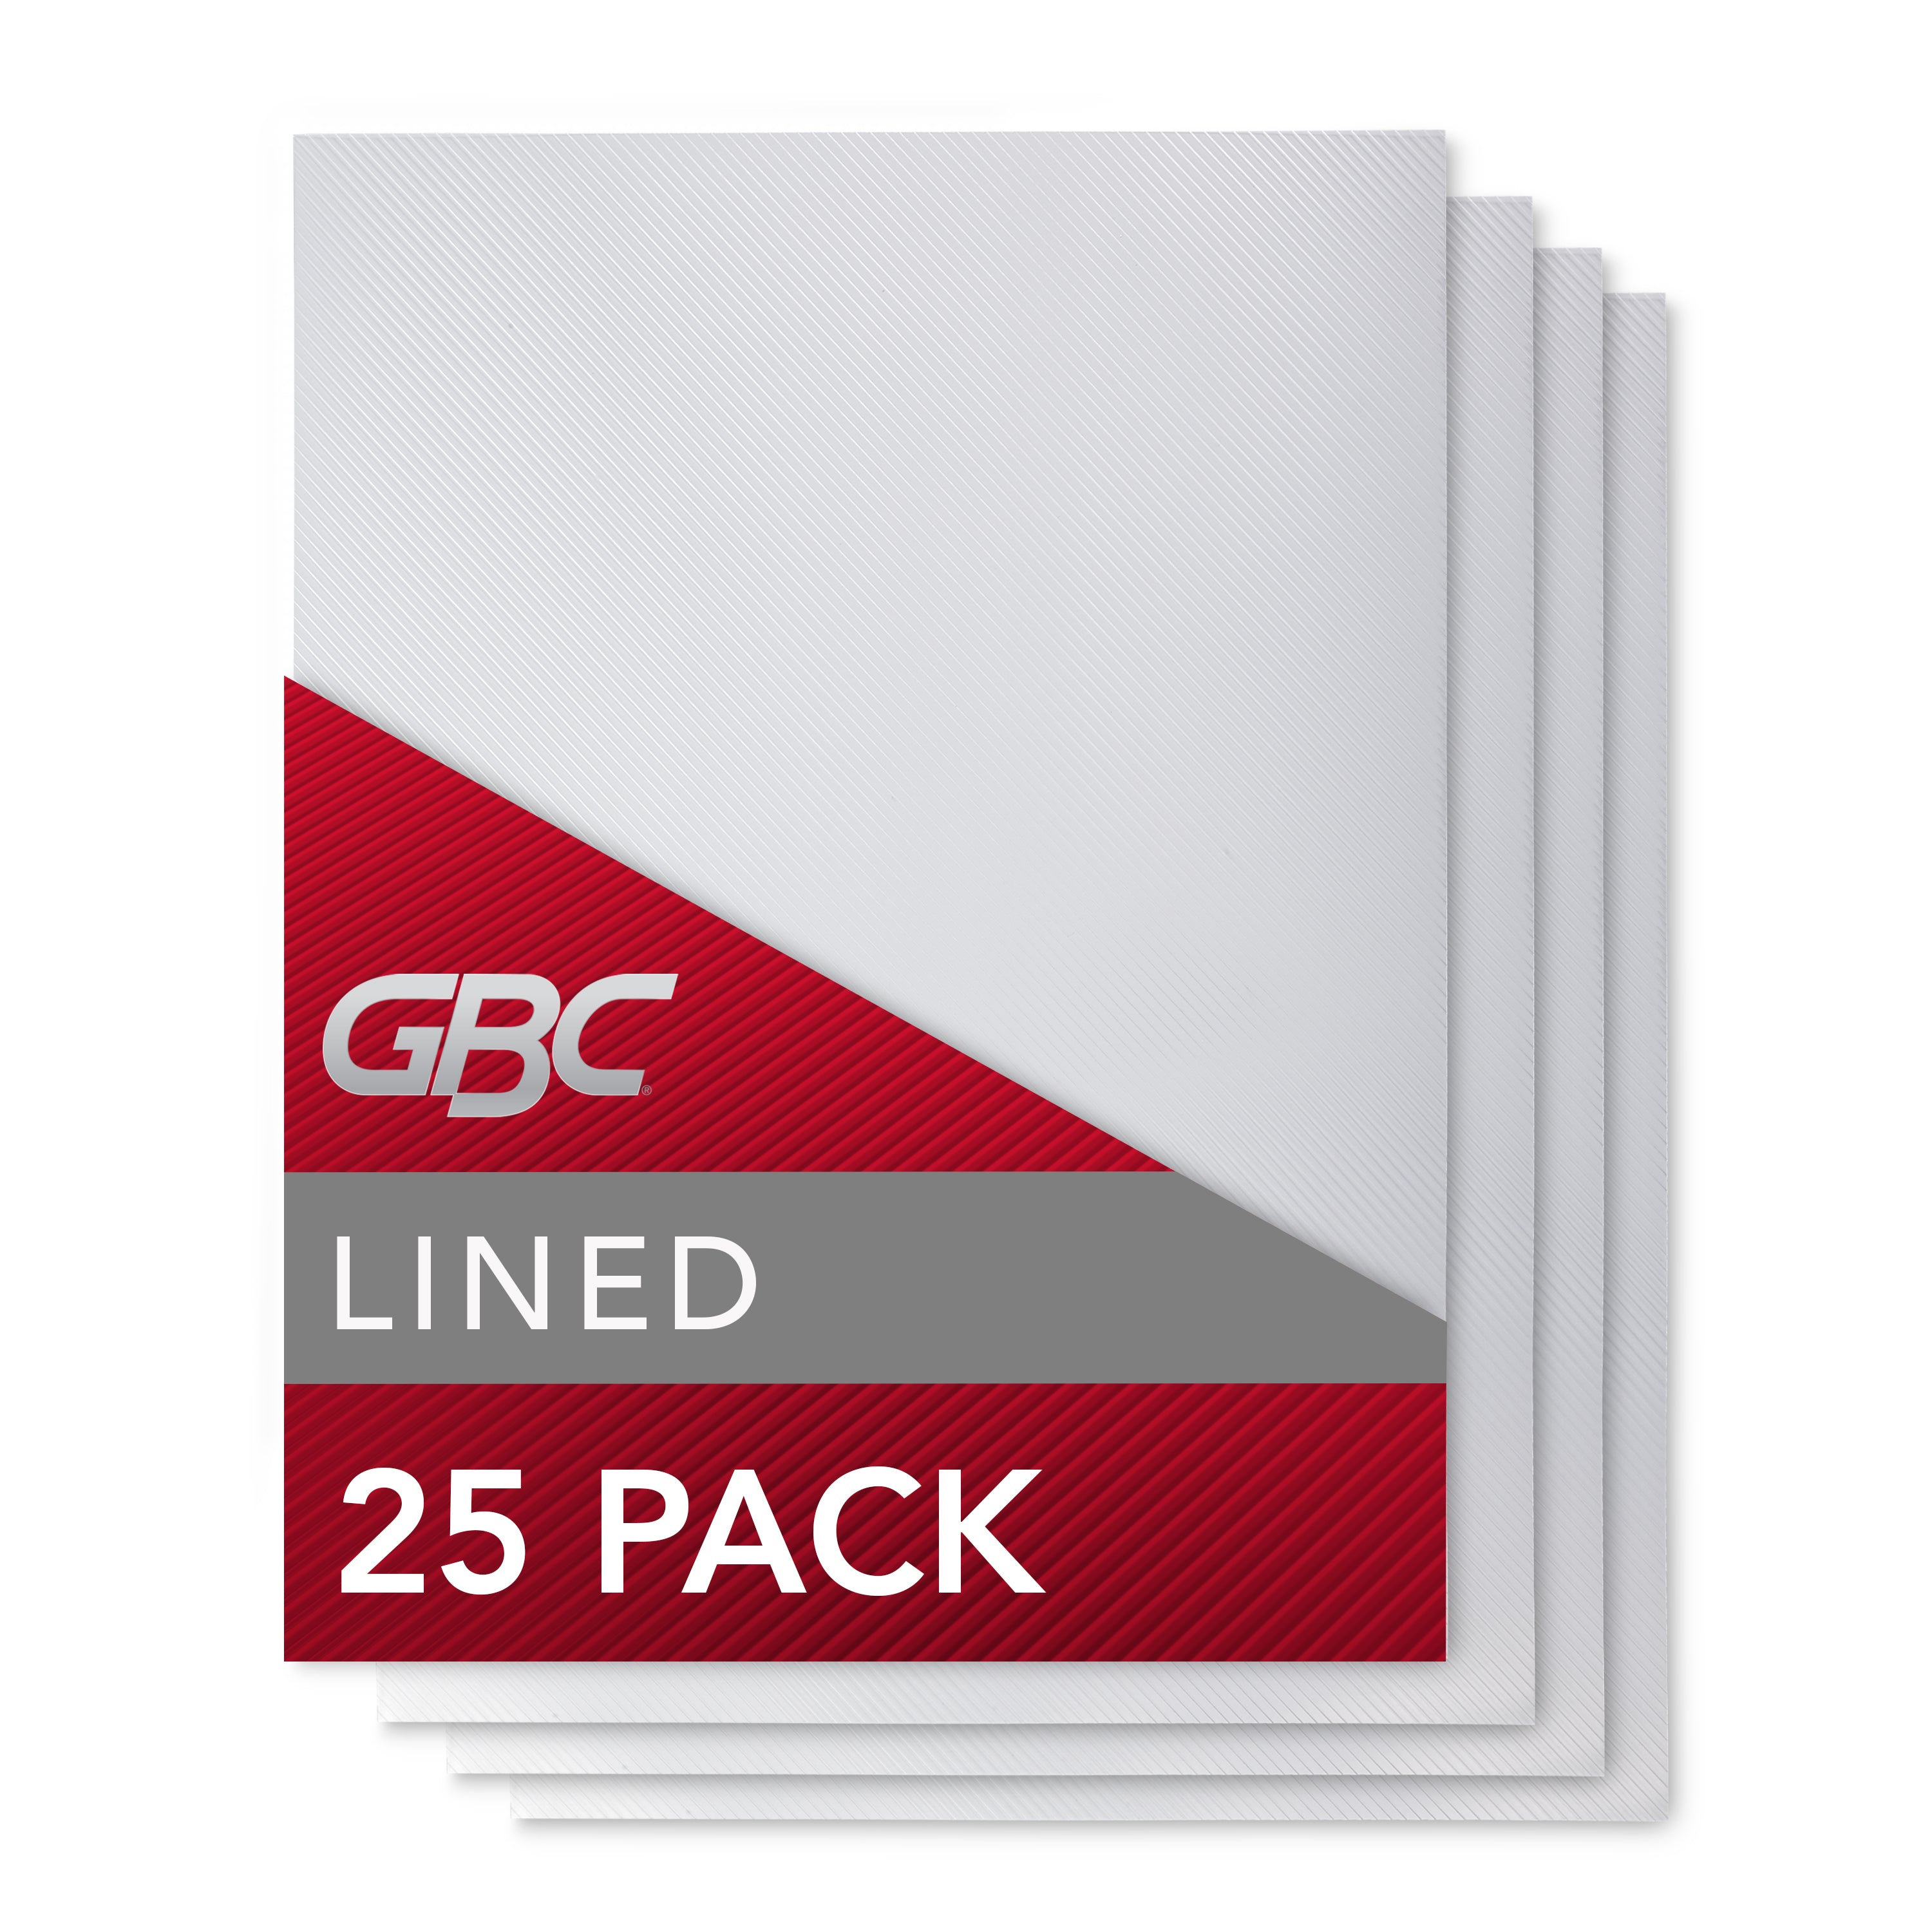 GBC Binding Presentation Covers, Unpunched, Lined Pattern, 8 1/2" x 11" (25 Pack)